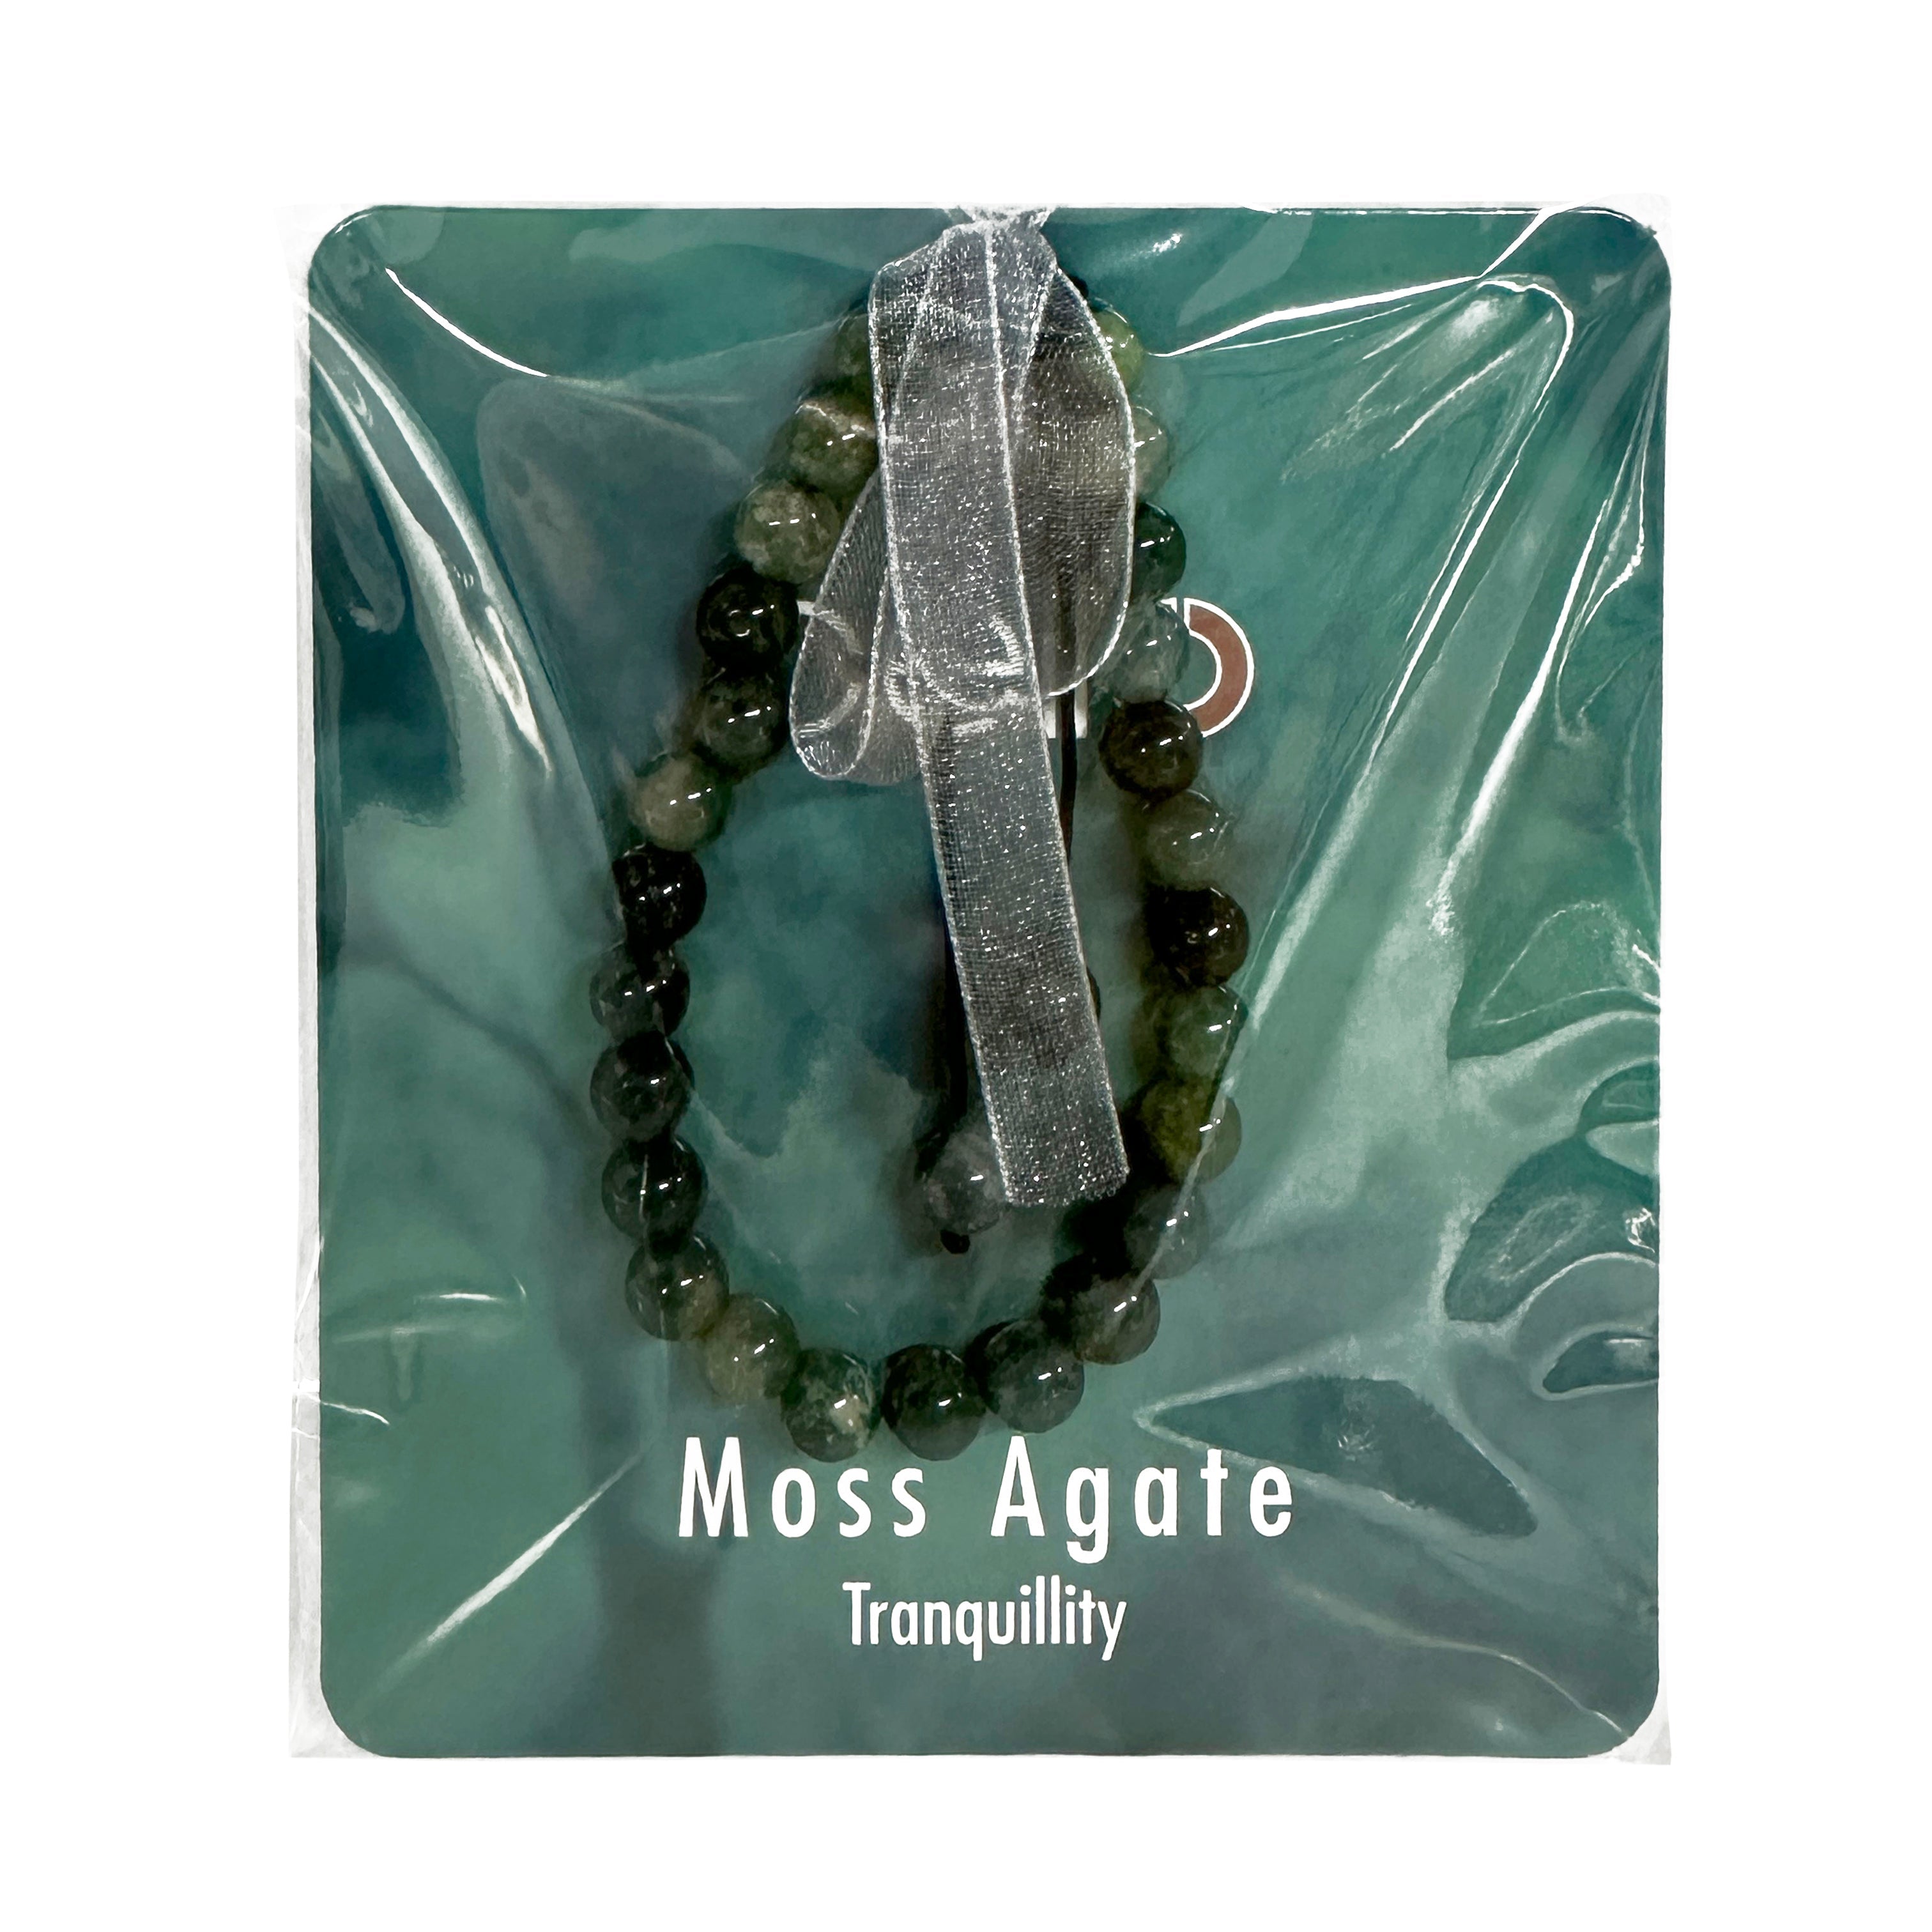 By drawing us closer to nature, Moss Agate can achieve a sense of emotional balance and tranquillity. When your busy life feels like you
are spinning out of control, this stone will bring you calm and peace.